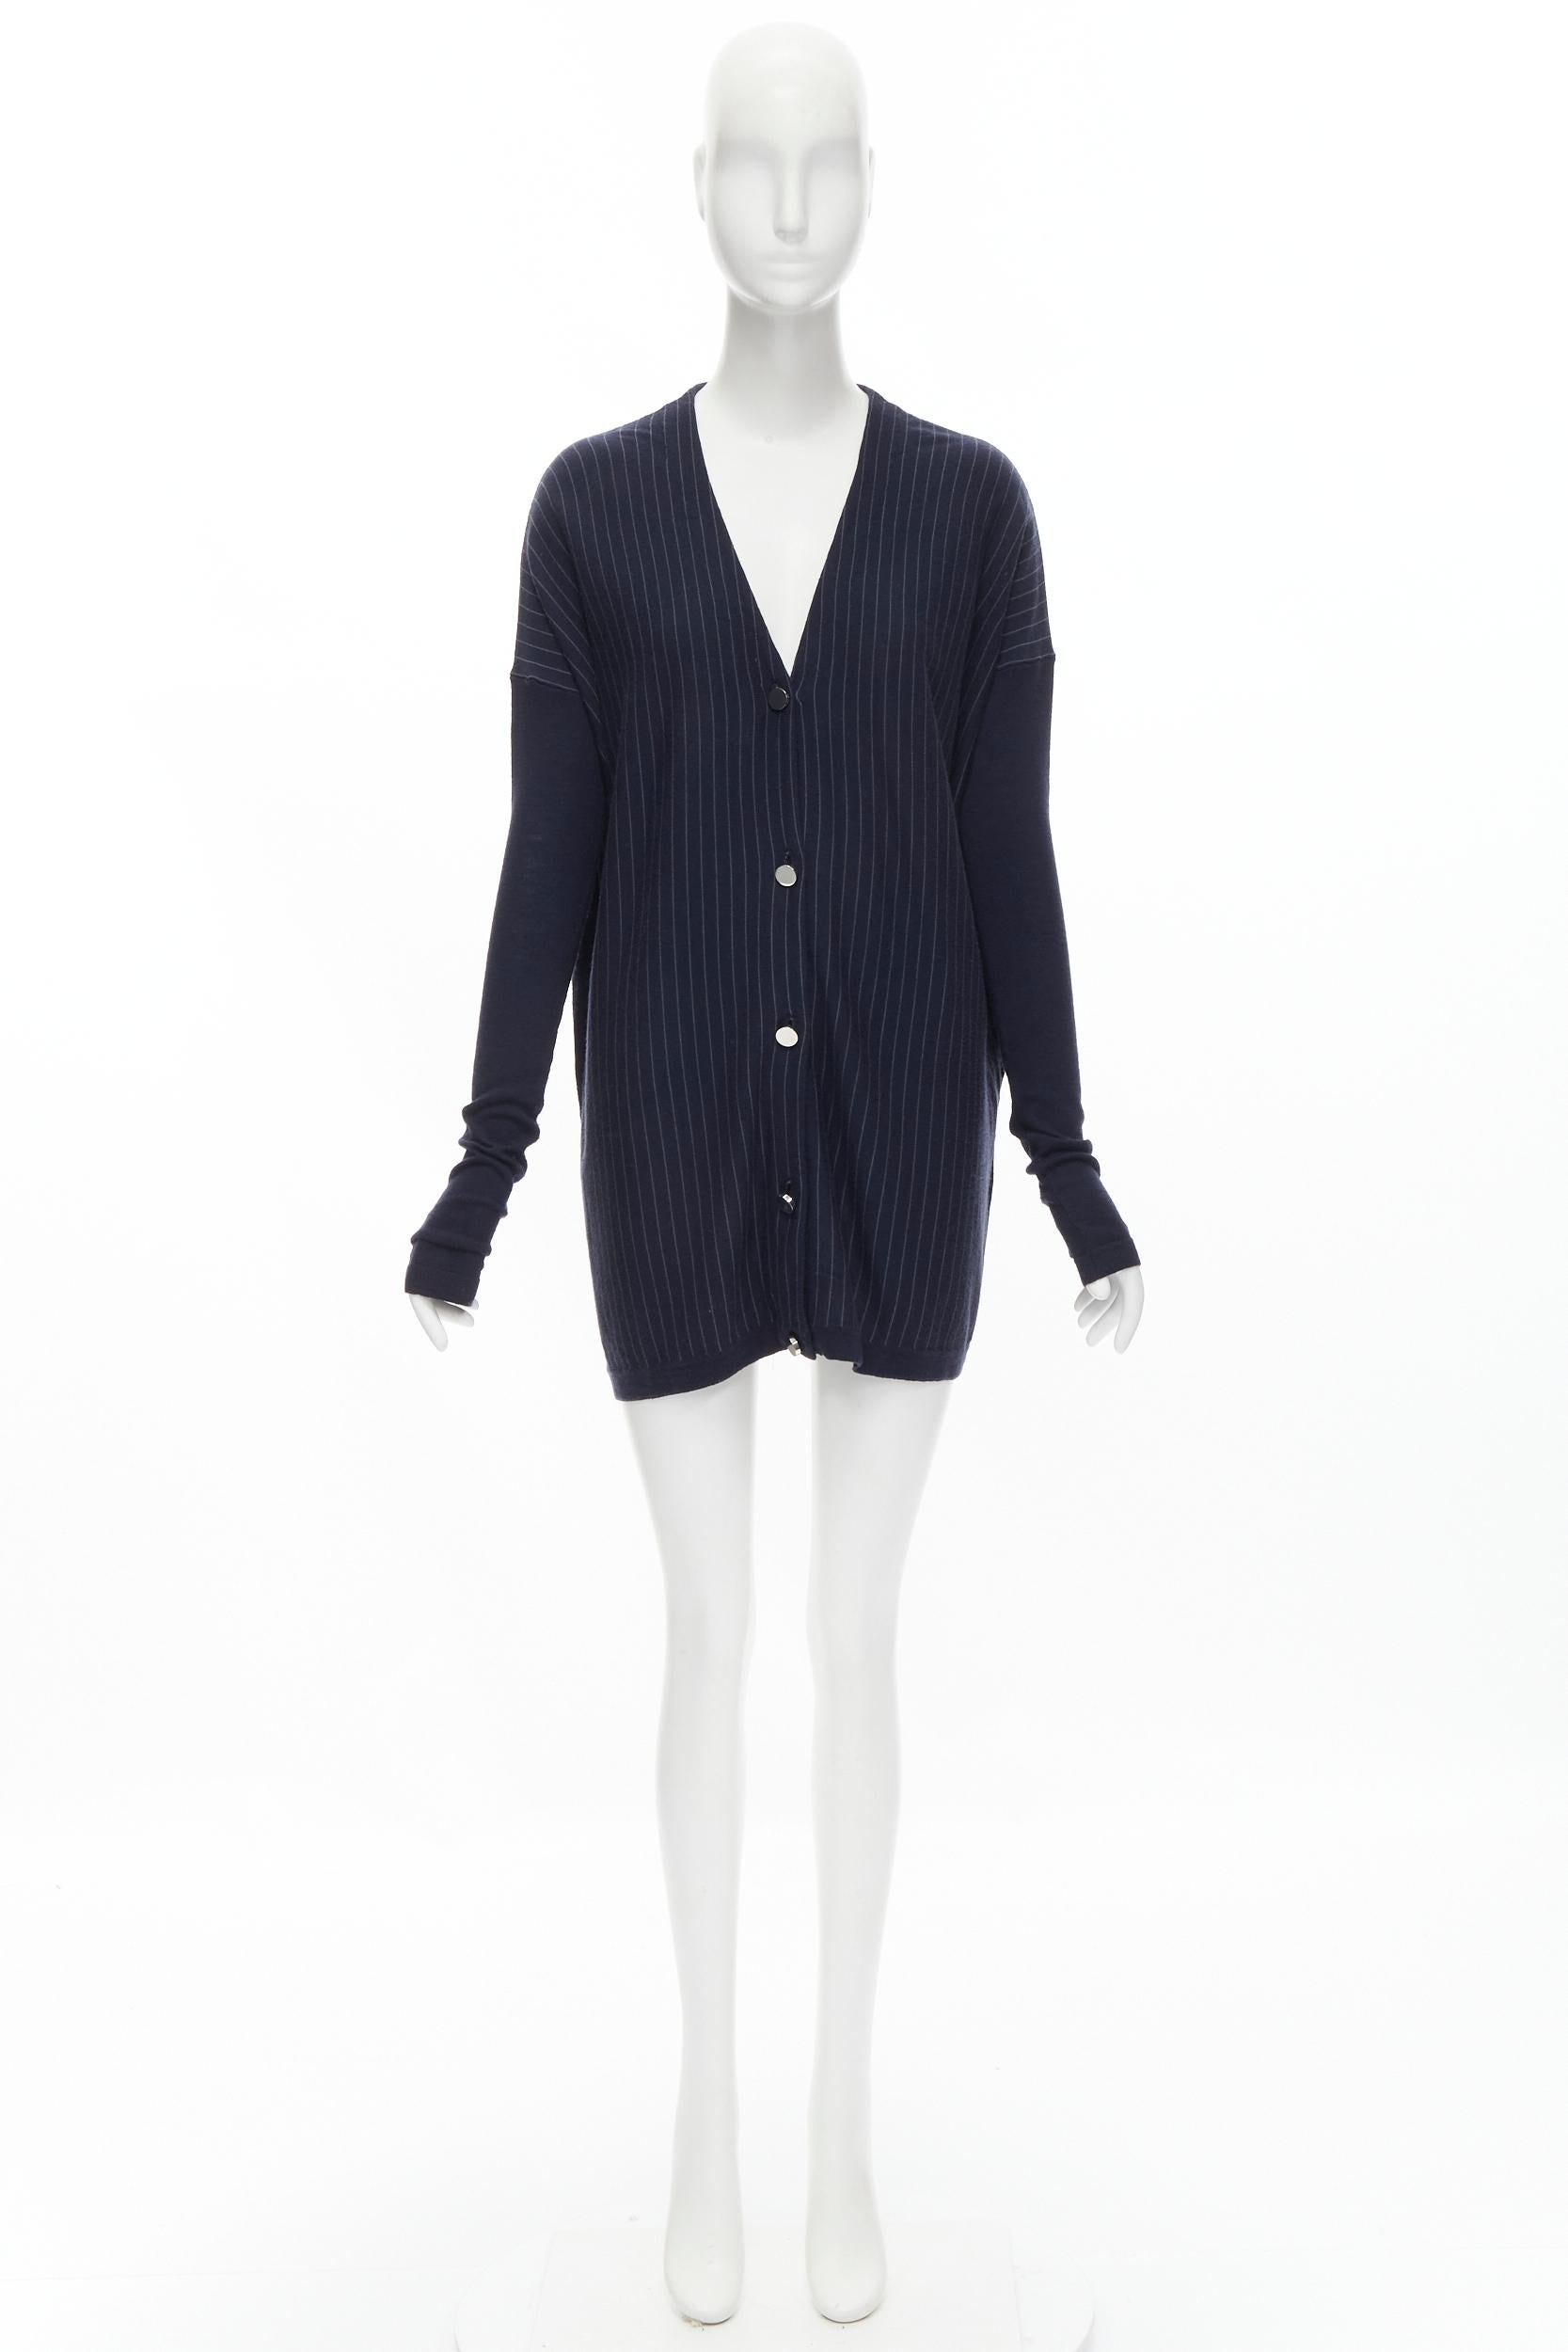 THE ROW navy blue pinstripe silver mirrored button long length cardigan XS 4